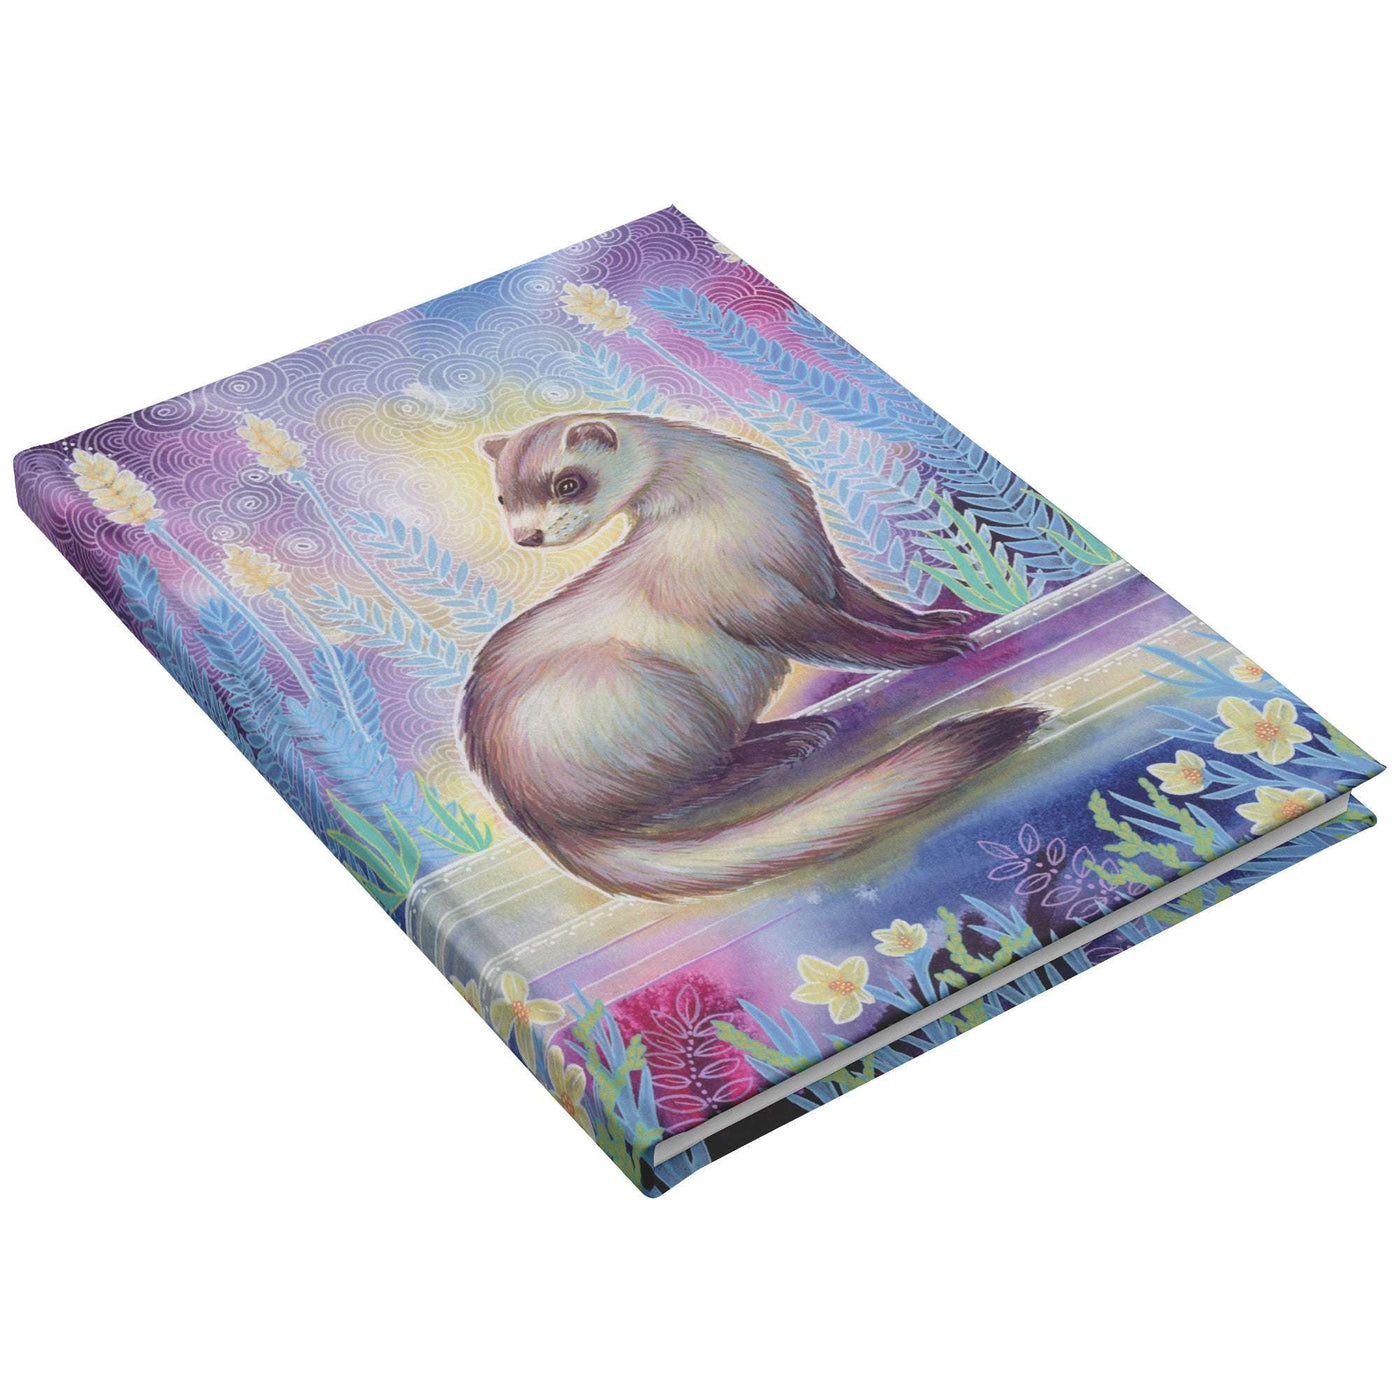 A colorful Ferret Journal cover featuring an artistic illustration of a ferret sitting amidst vibrant, stylized floral patterns.